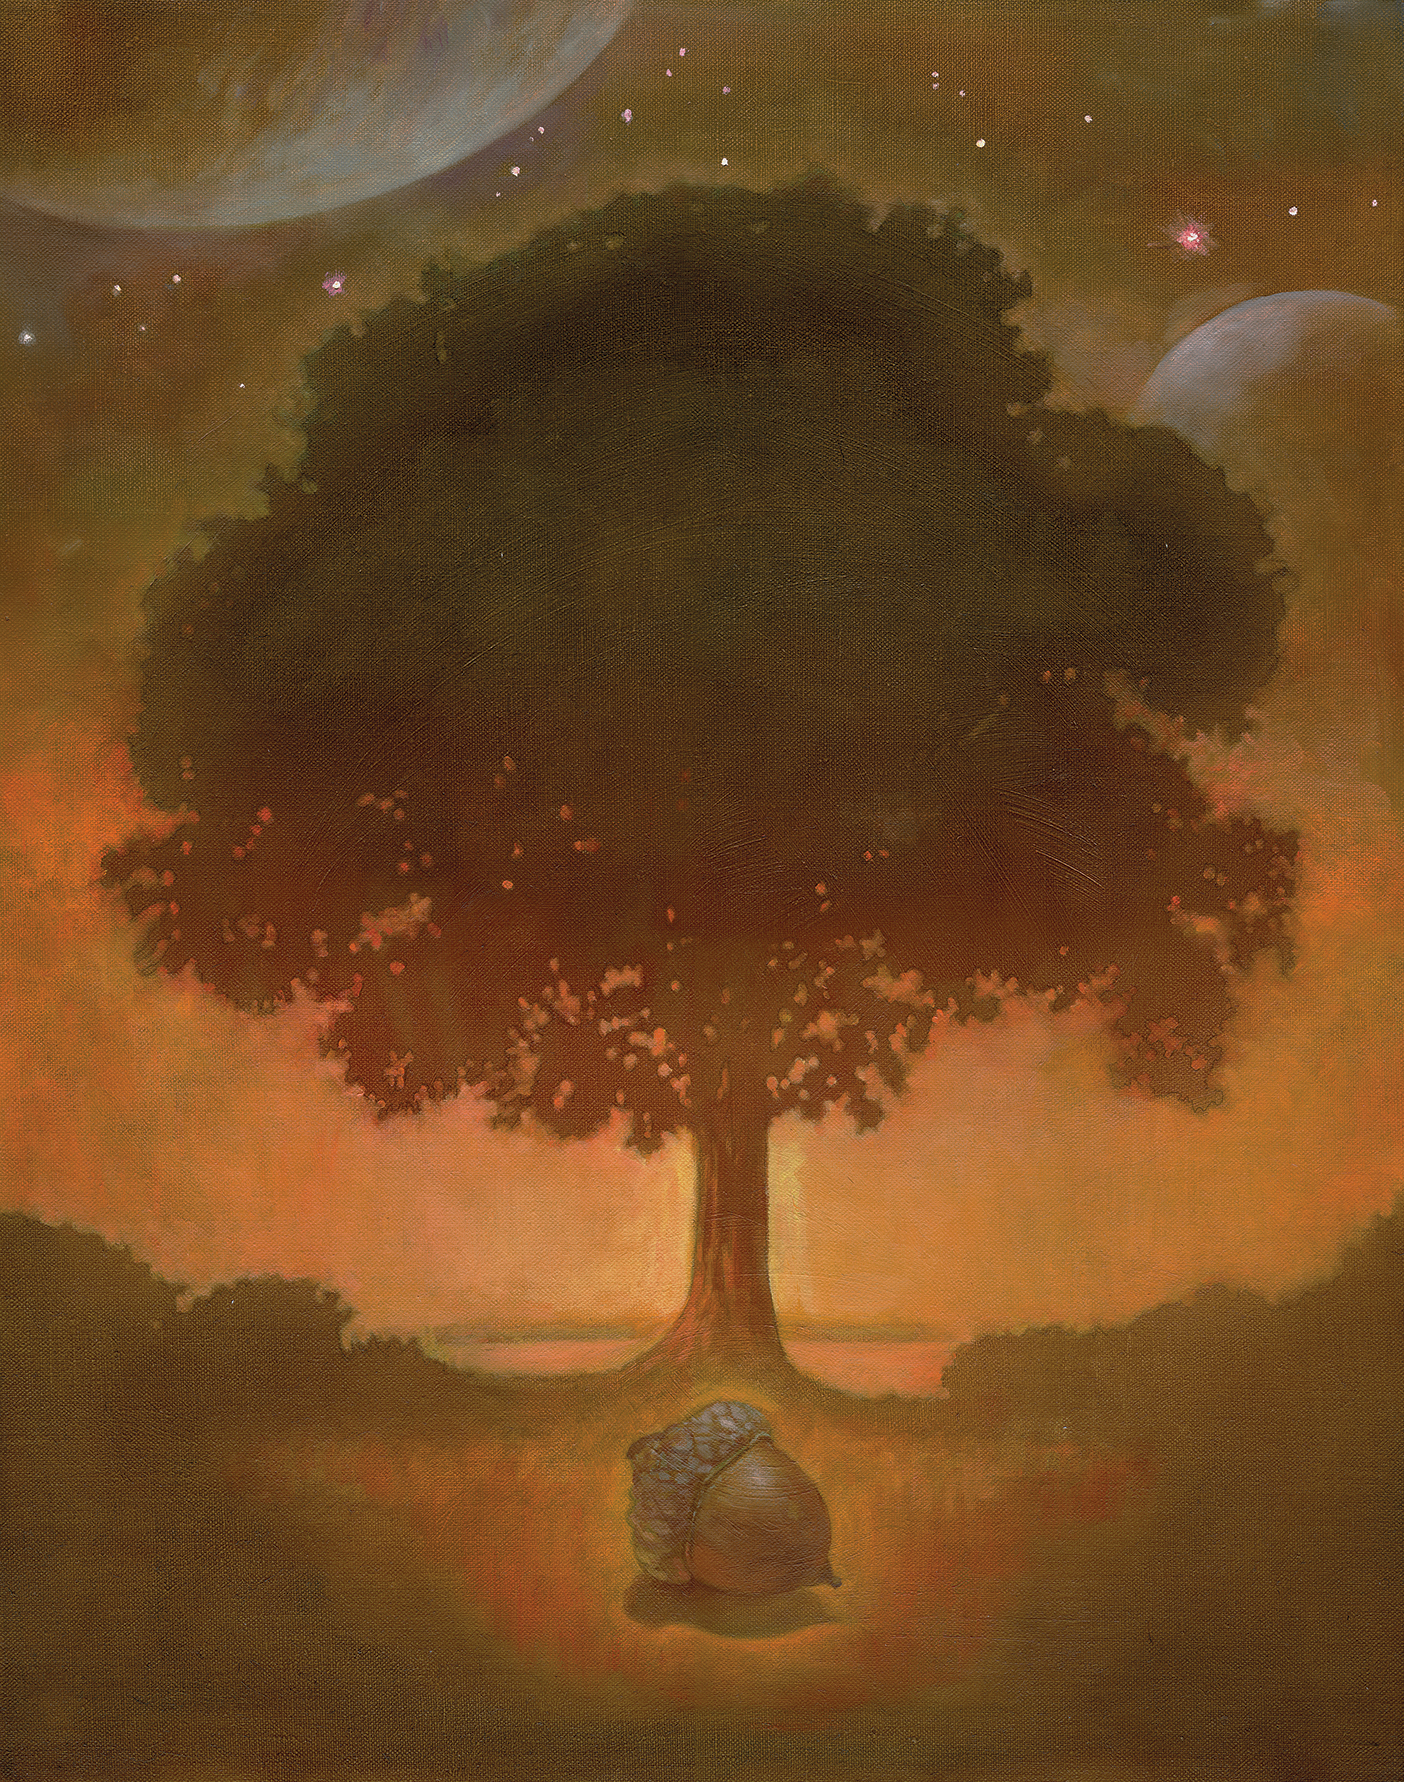 Illustration of the silhouette of an oak tree lit from behind, with an acorn in the foreground.